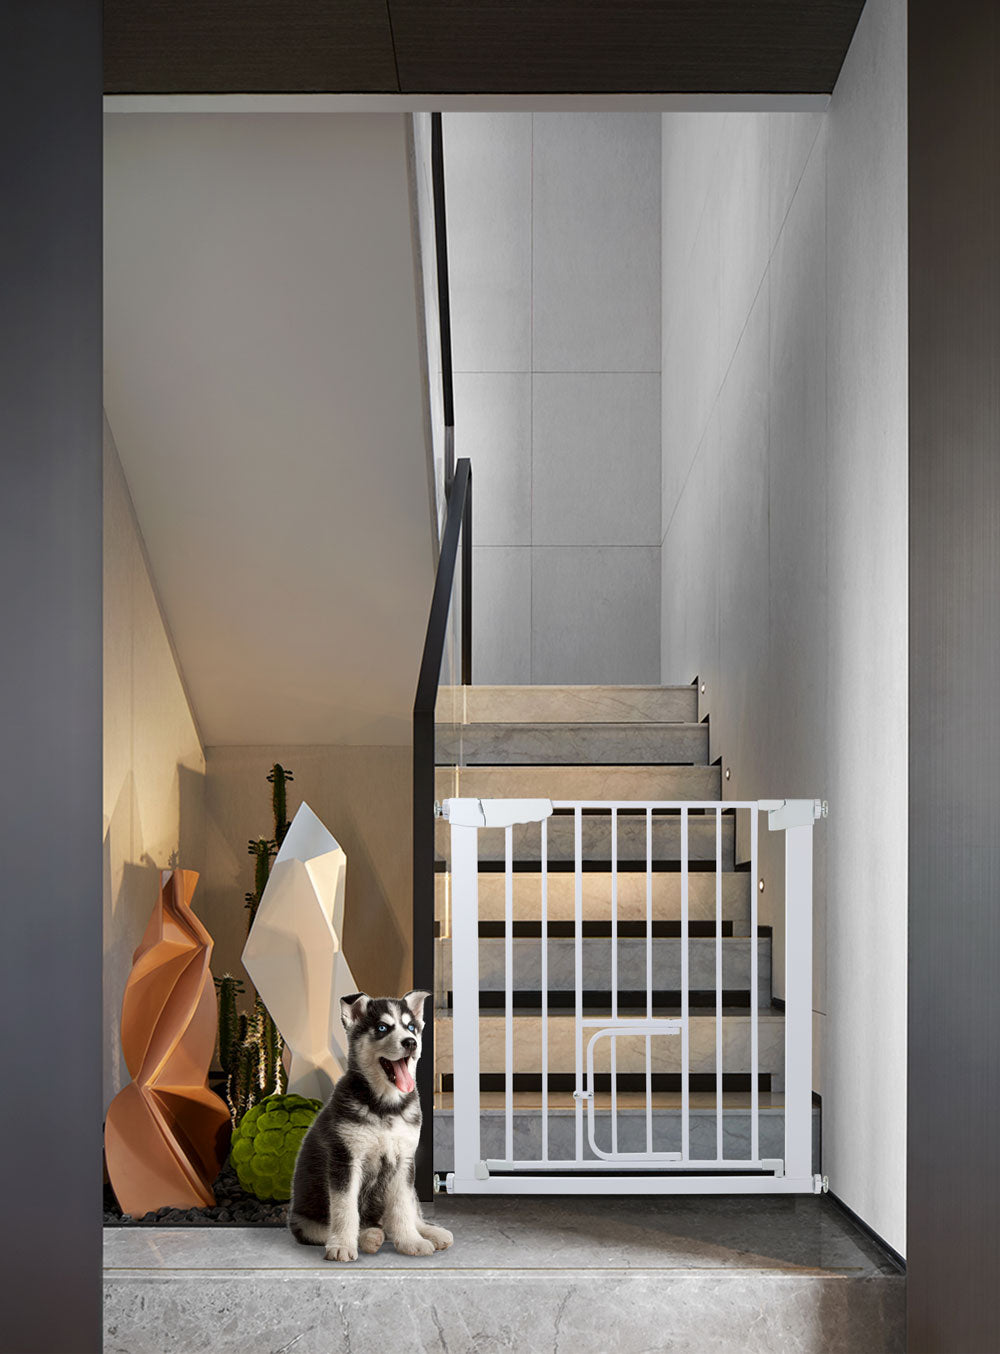 76cm Tall Baby and Pet Security Gate with Pet Door